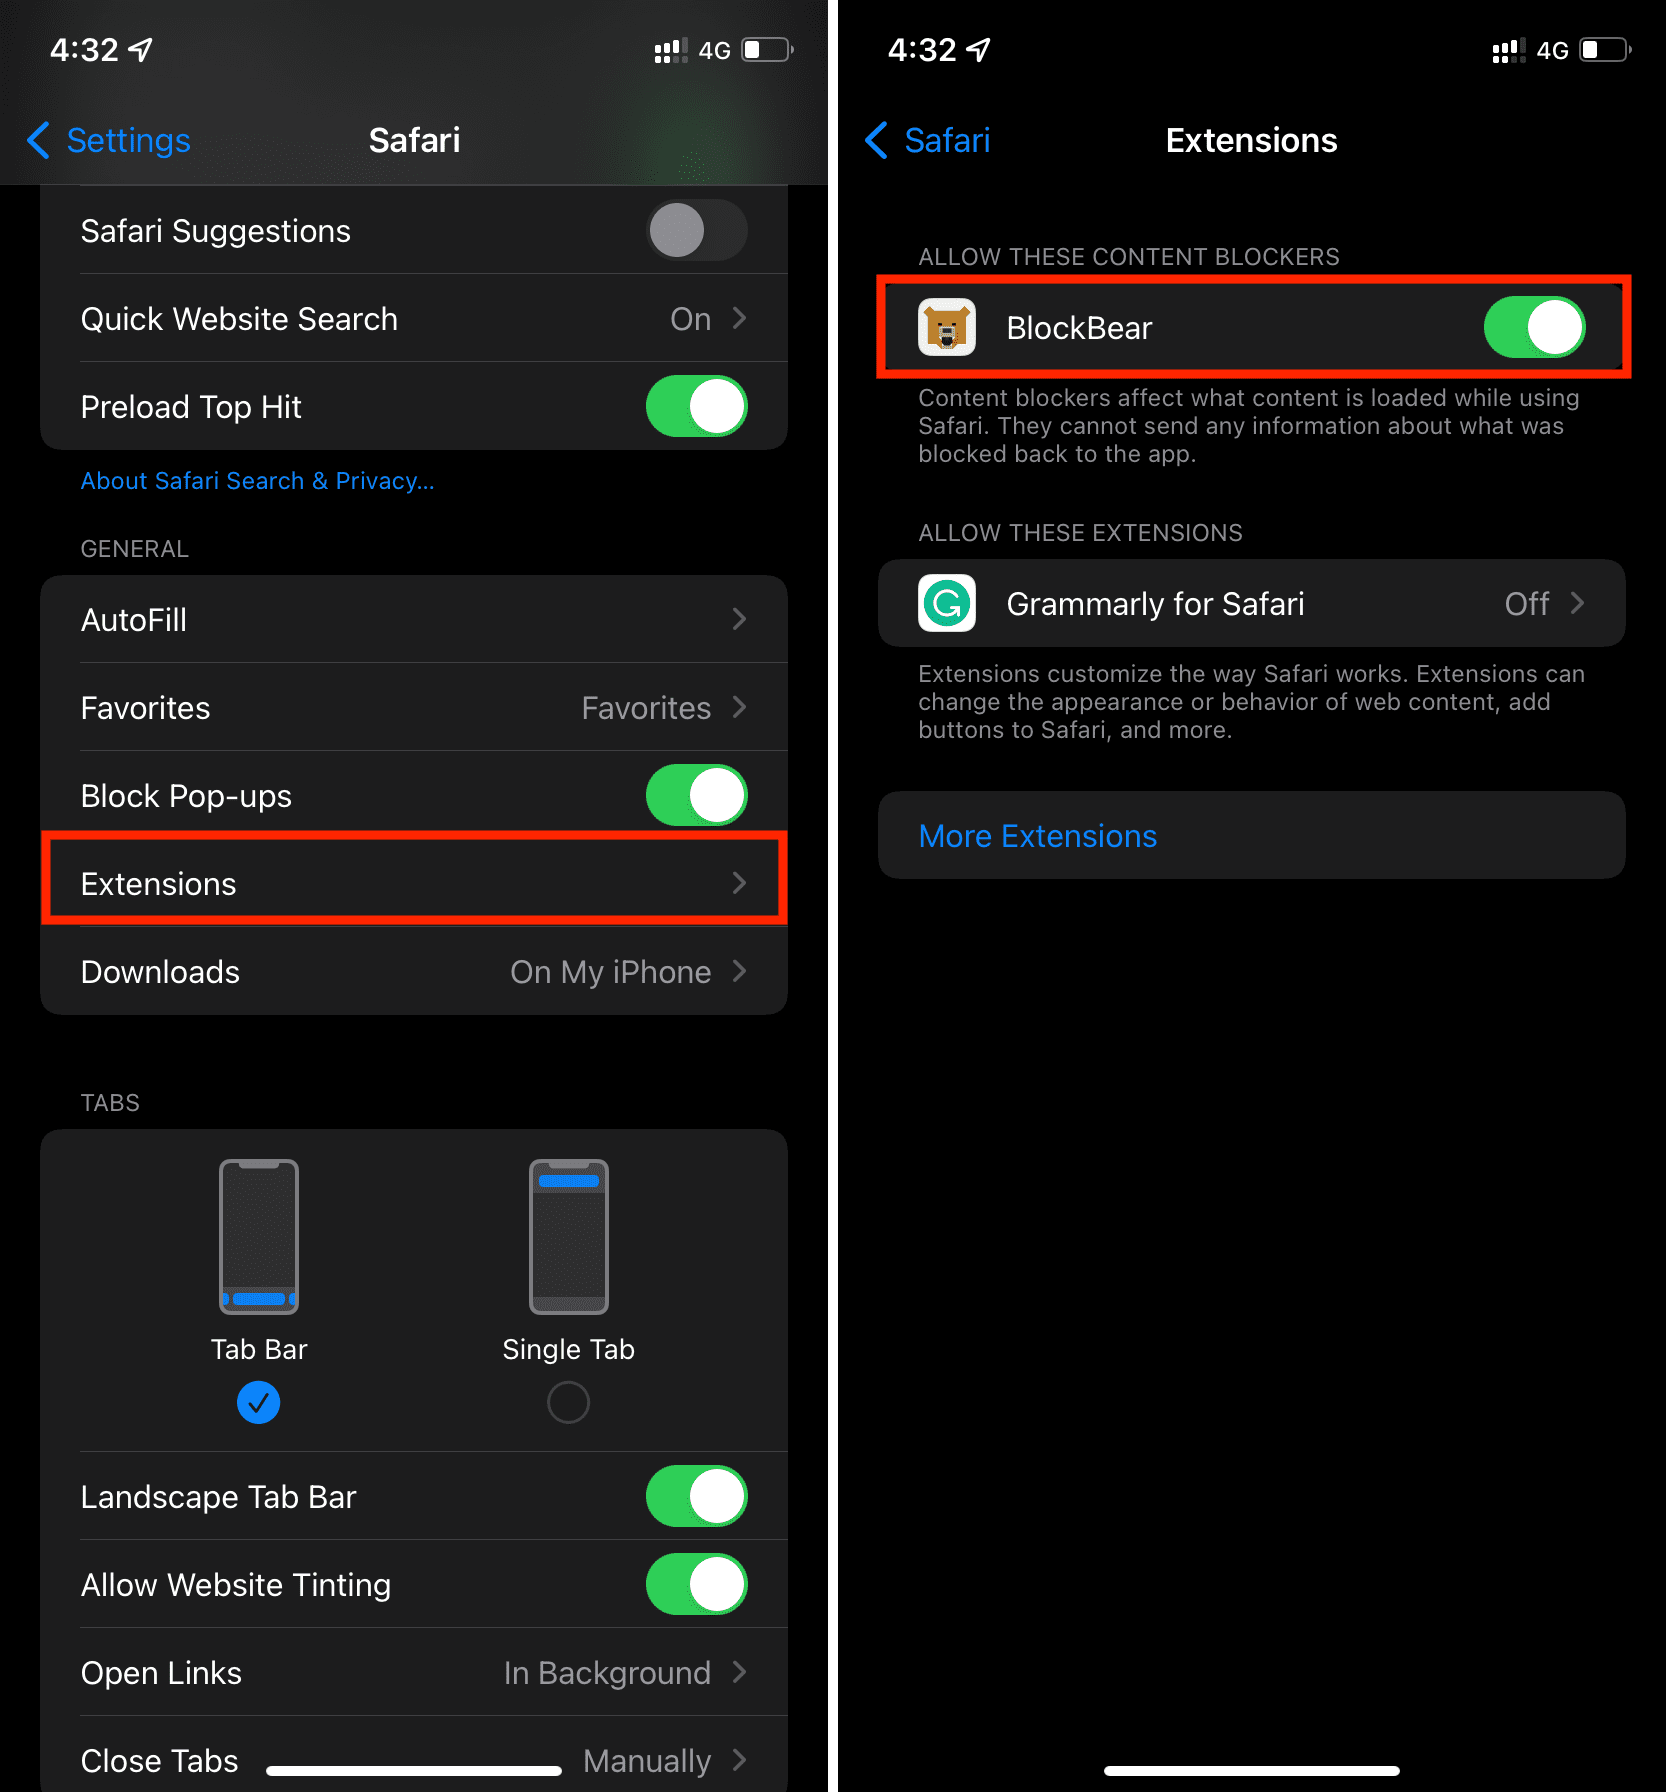 Use Content blockers in Safari on iPhone to help battery